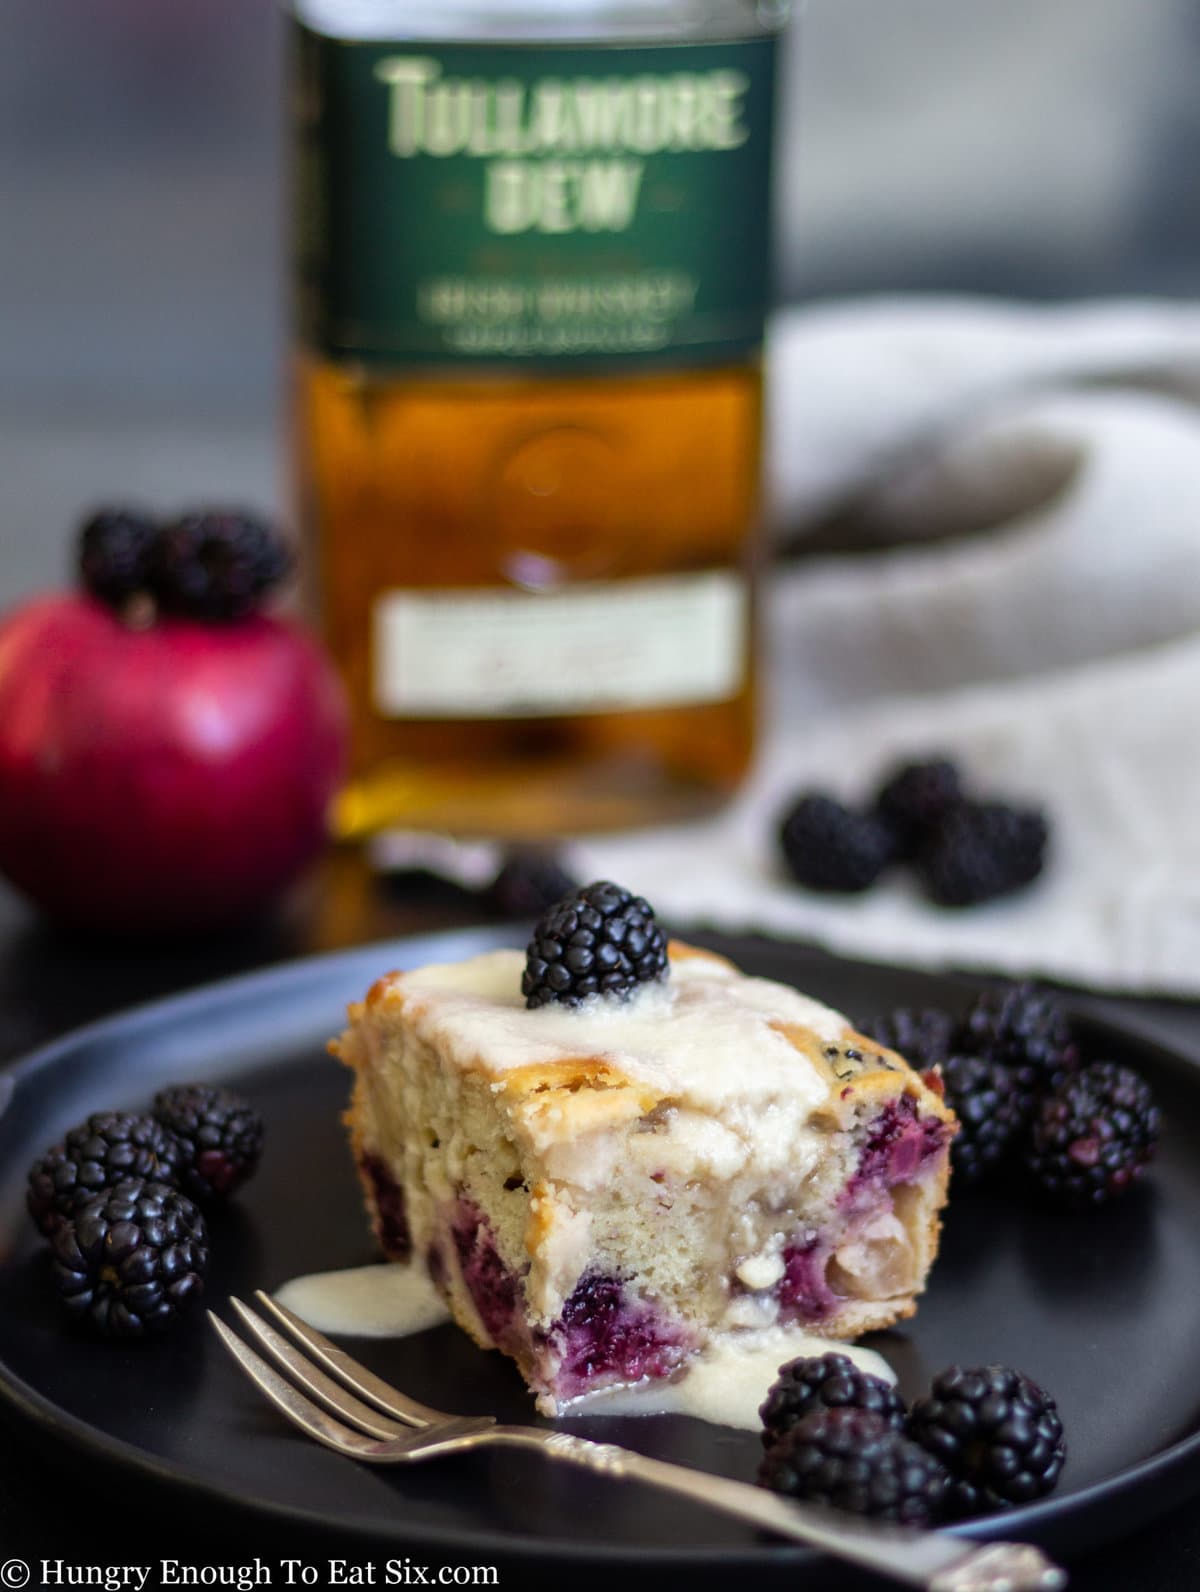 Berry filled cake slice on a plate with a bottle of whiskey in the background